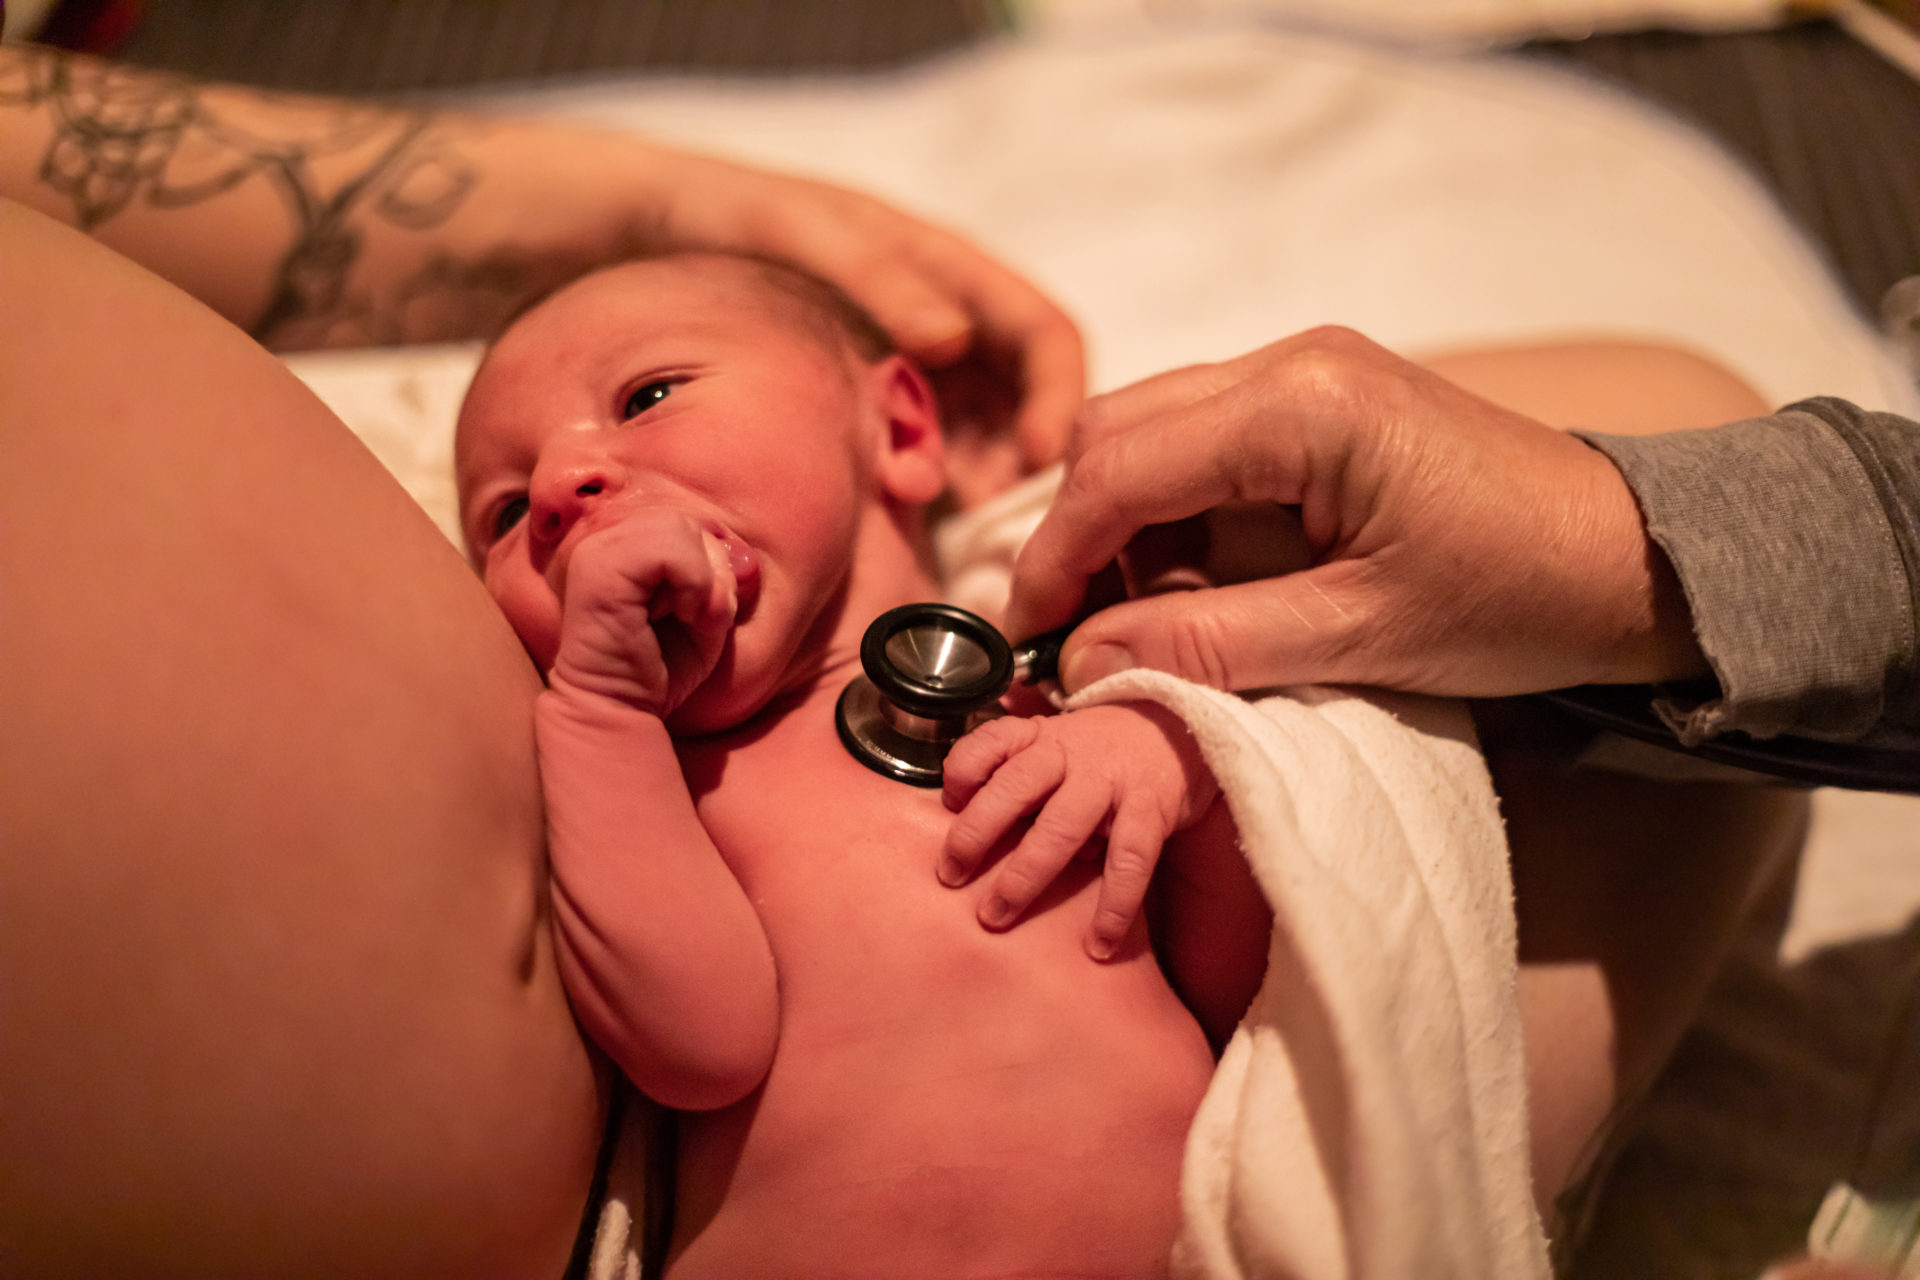 5 Things to Know About Having a Natural Birth - Penn Medicine